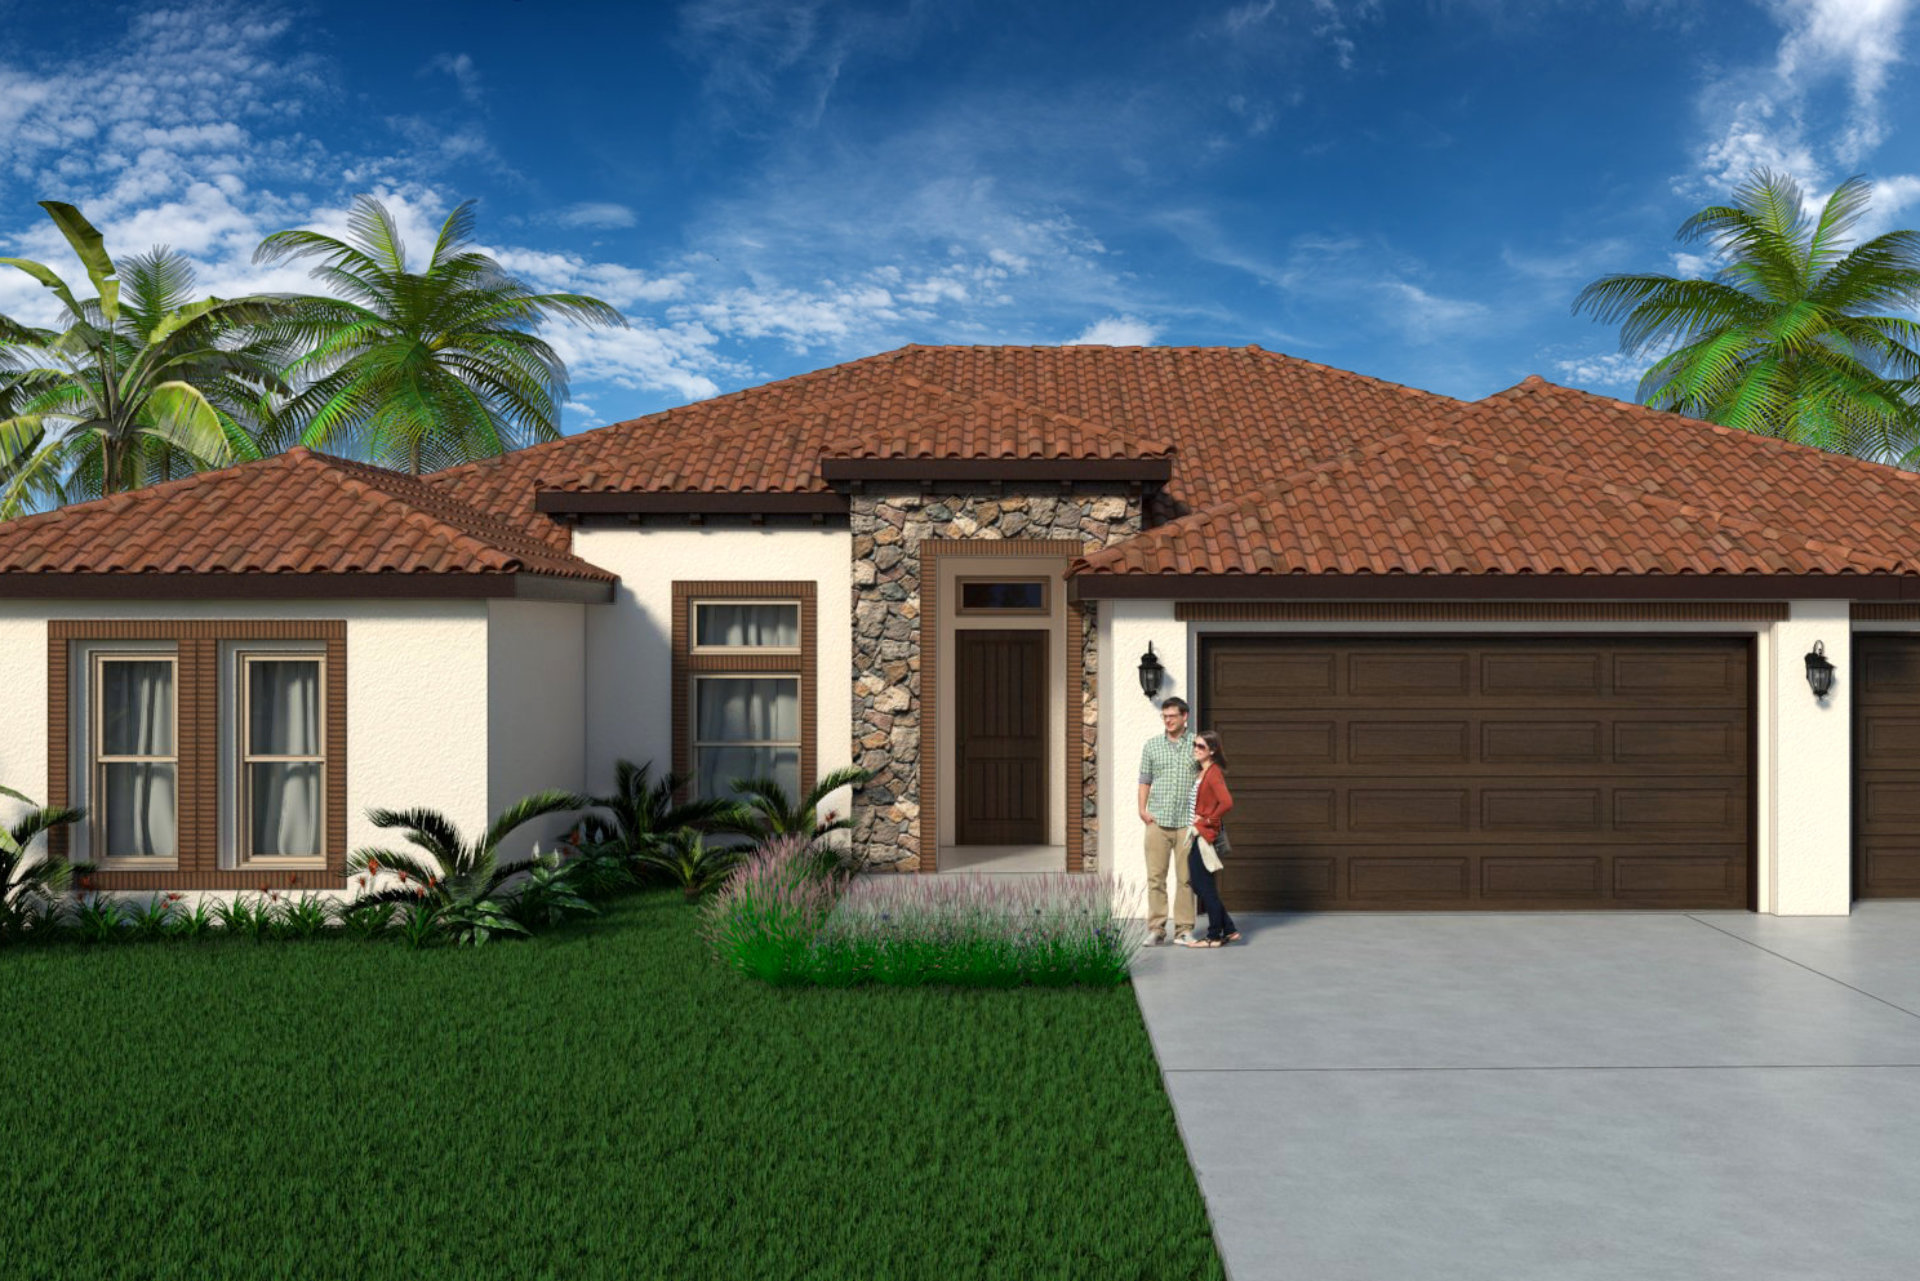 Render of new home with couple standing in front